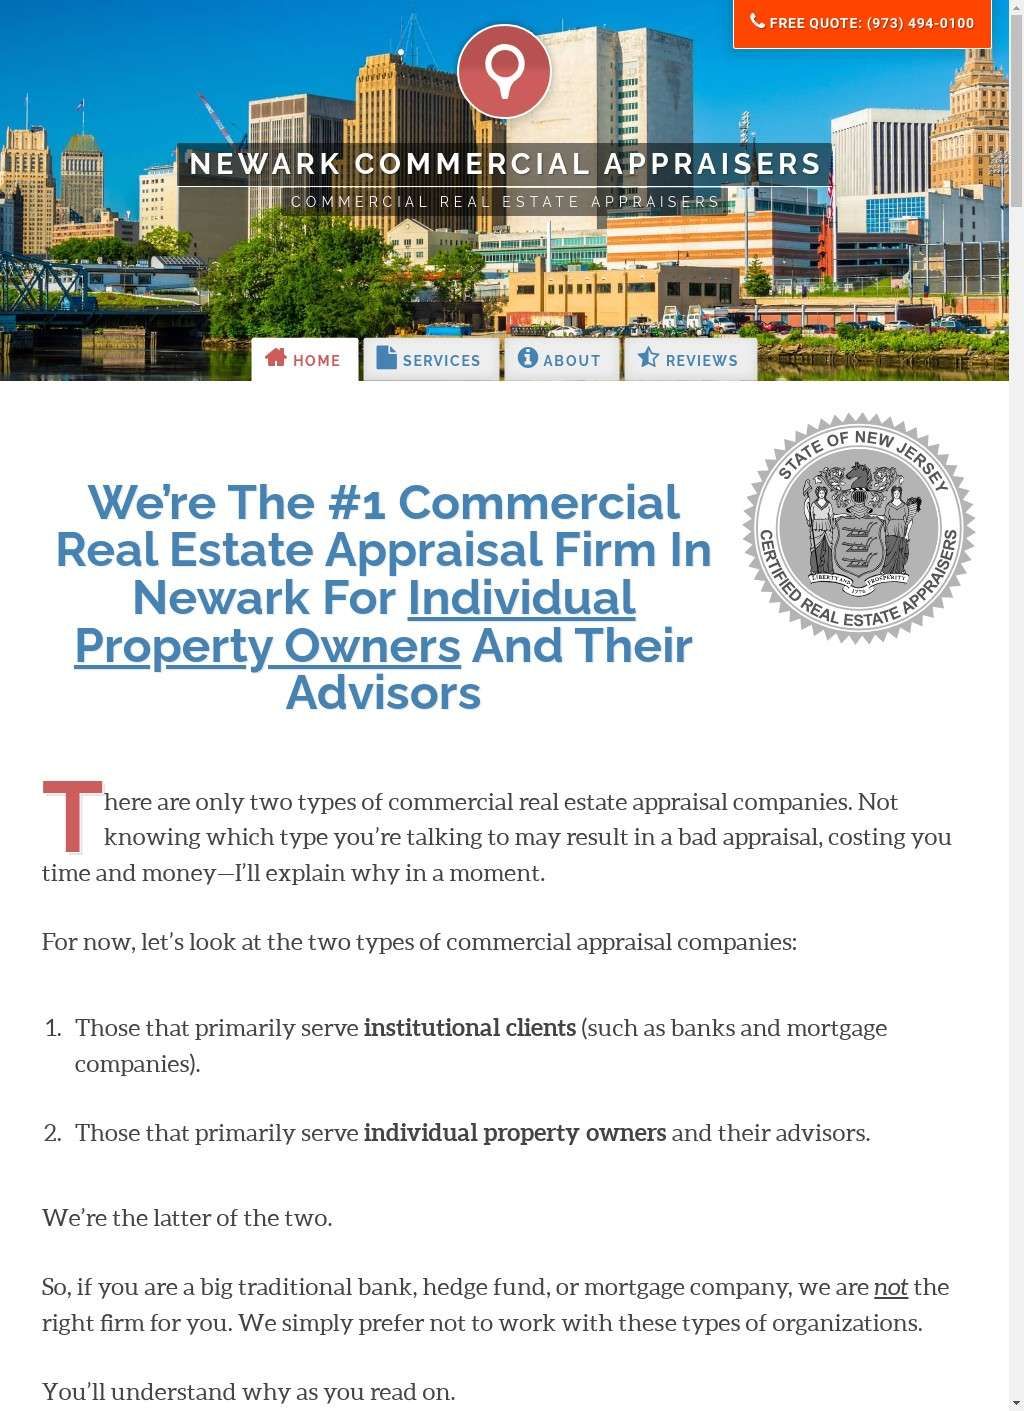 Appraisers of Newark Commercial Property